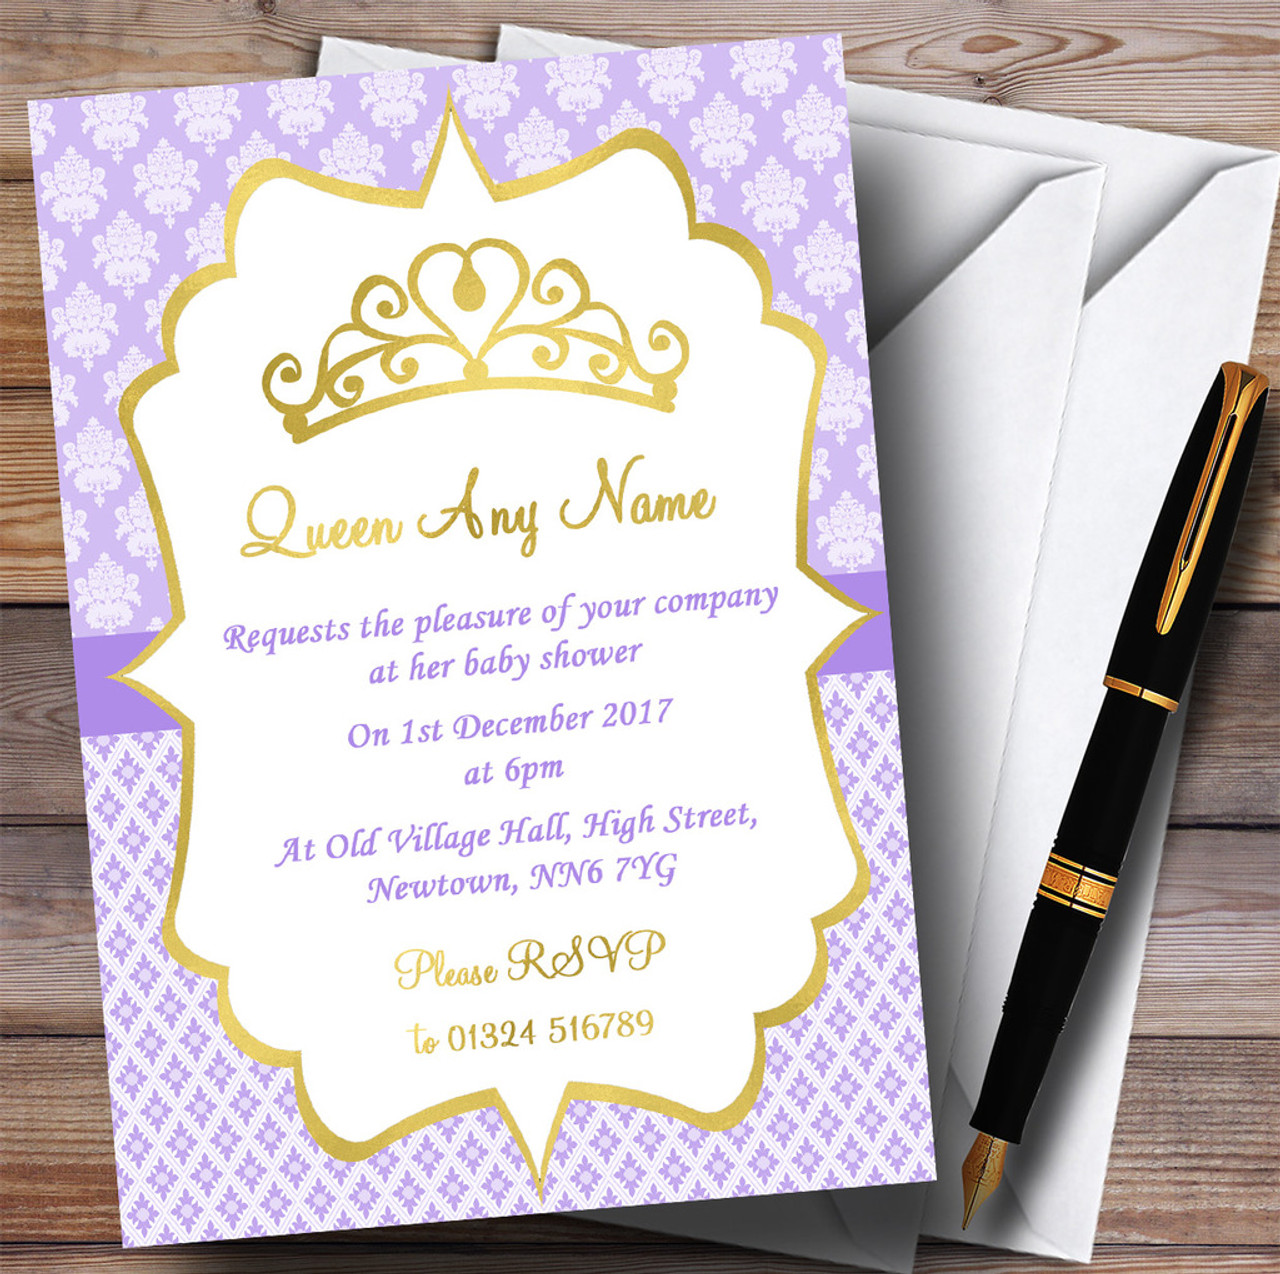 Team Bride golden quote with crown and heart on white. For t